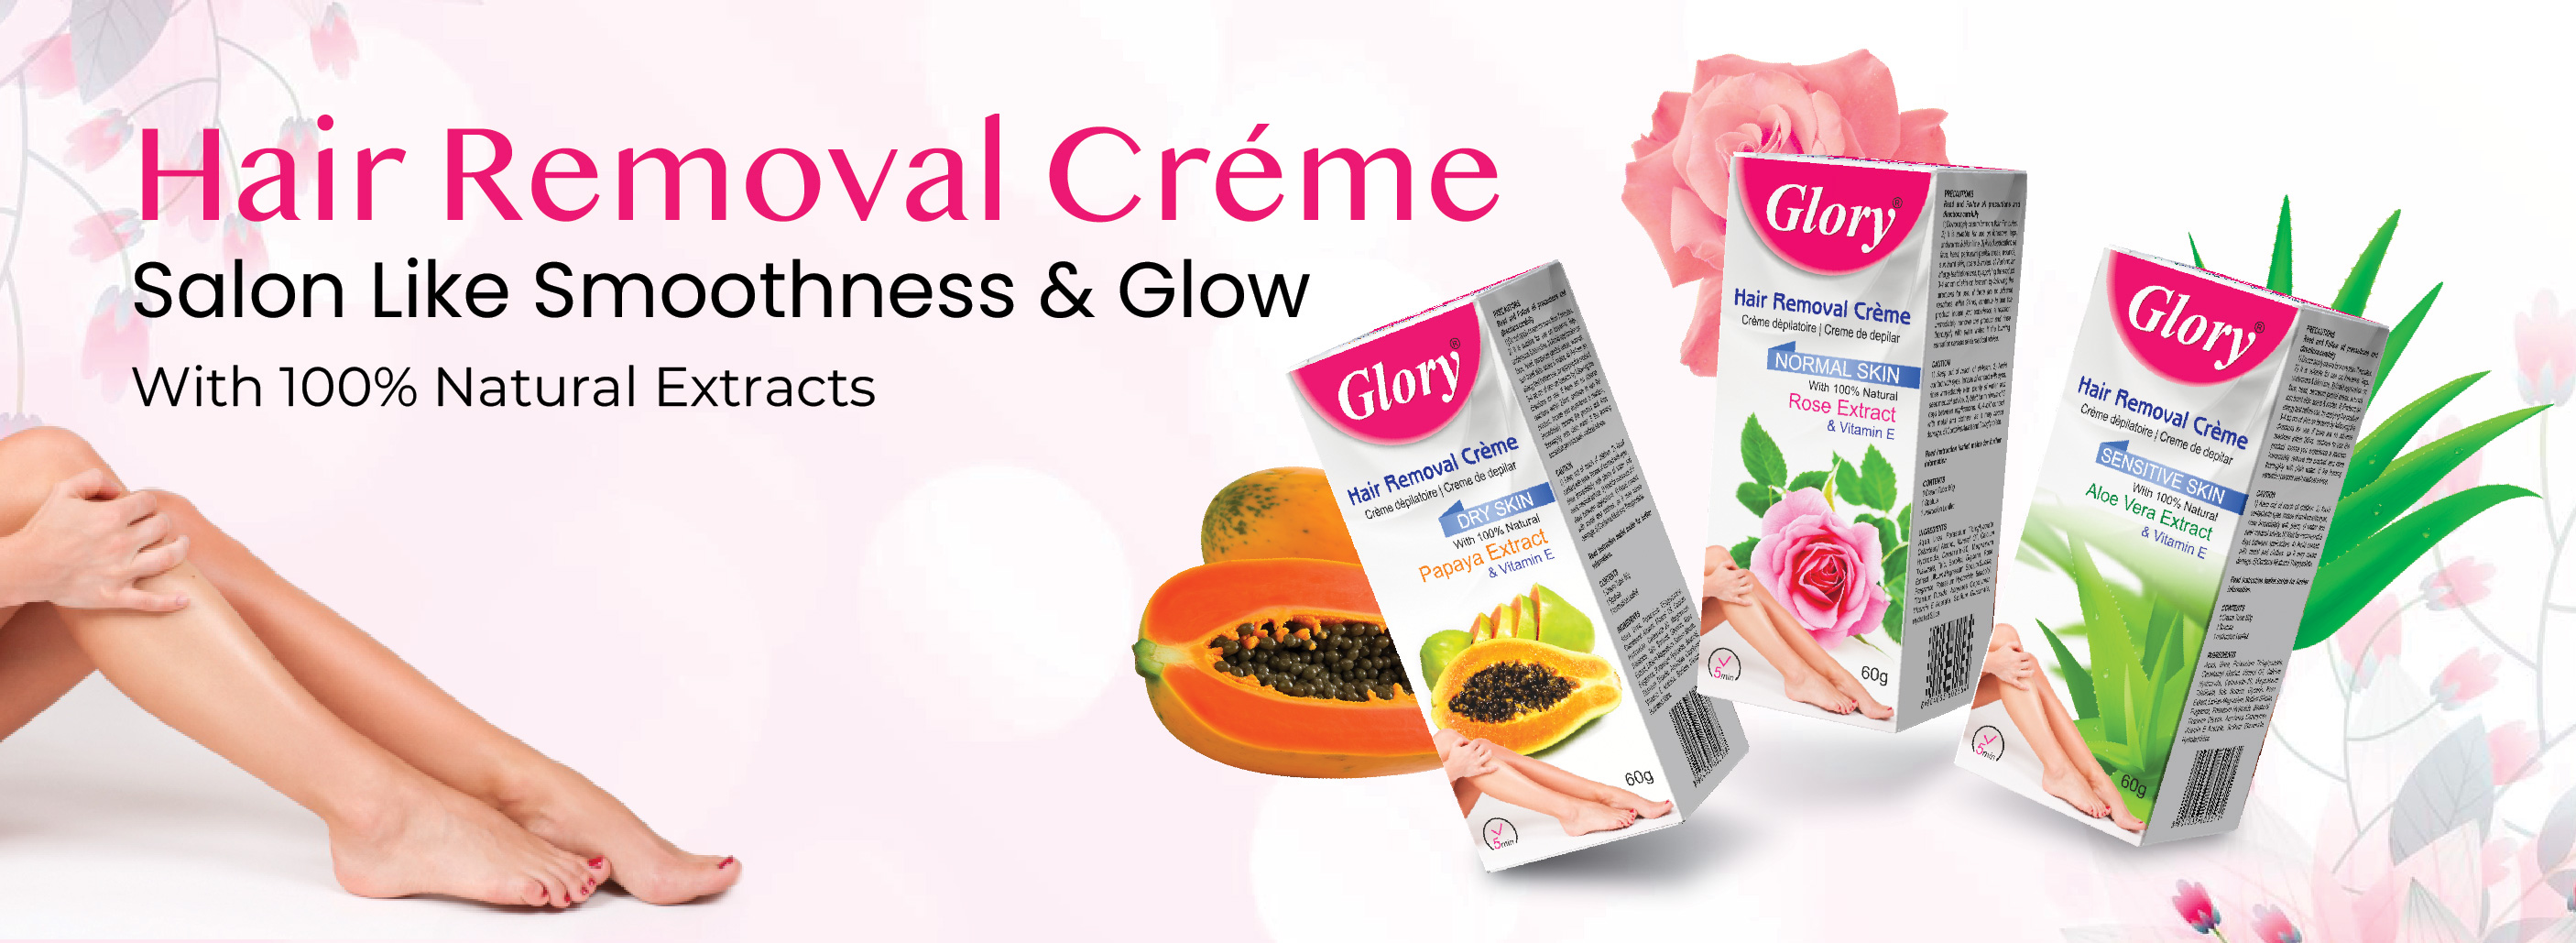 Hair Removal Creme Manufacturer | Hair Removal Creme Manufacturer in Australia